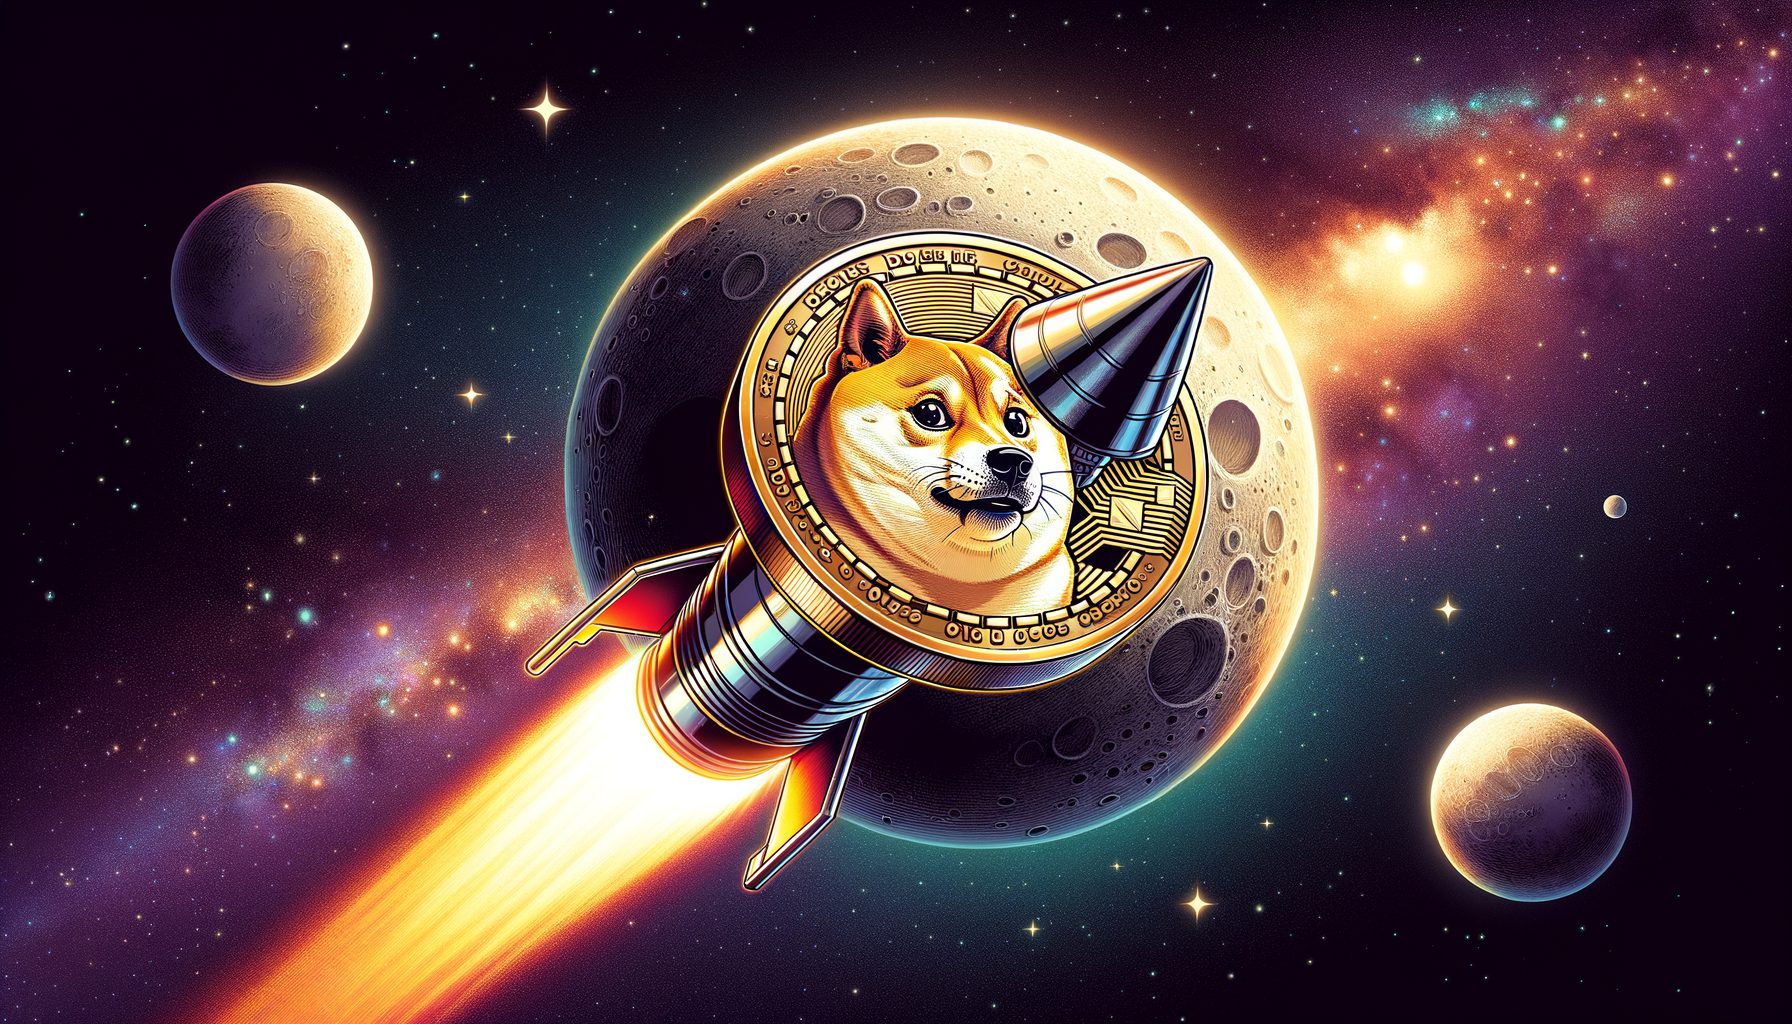 Dogecoin and Bitcoin Head to The Moon in Today’s Rocket Launch